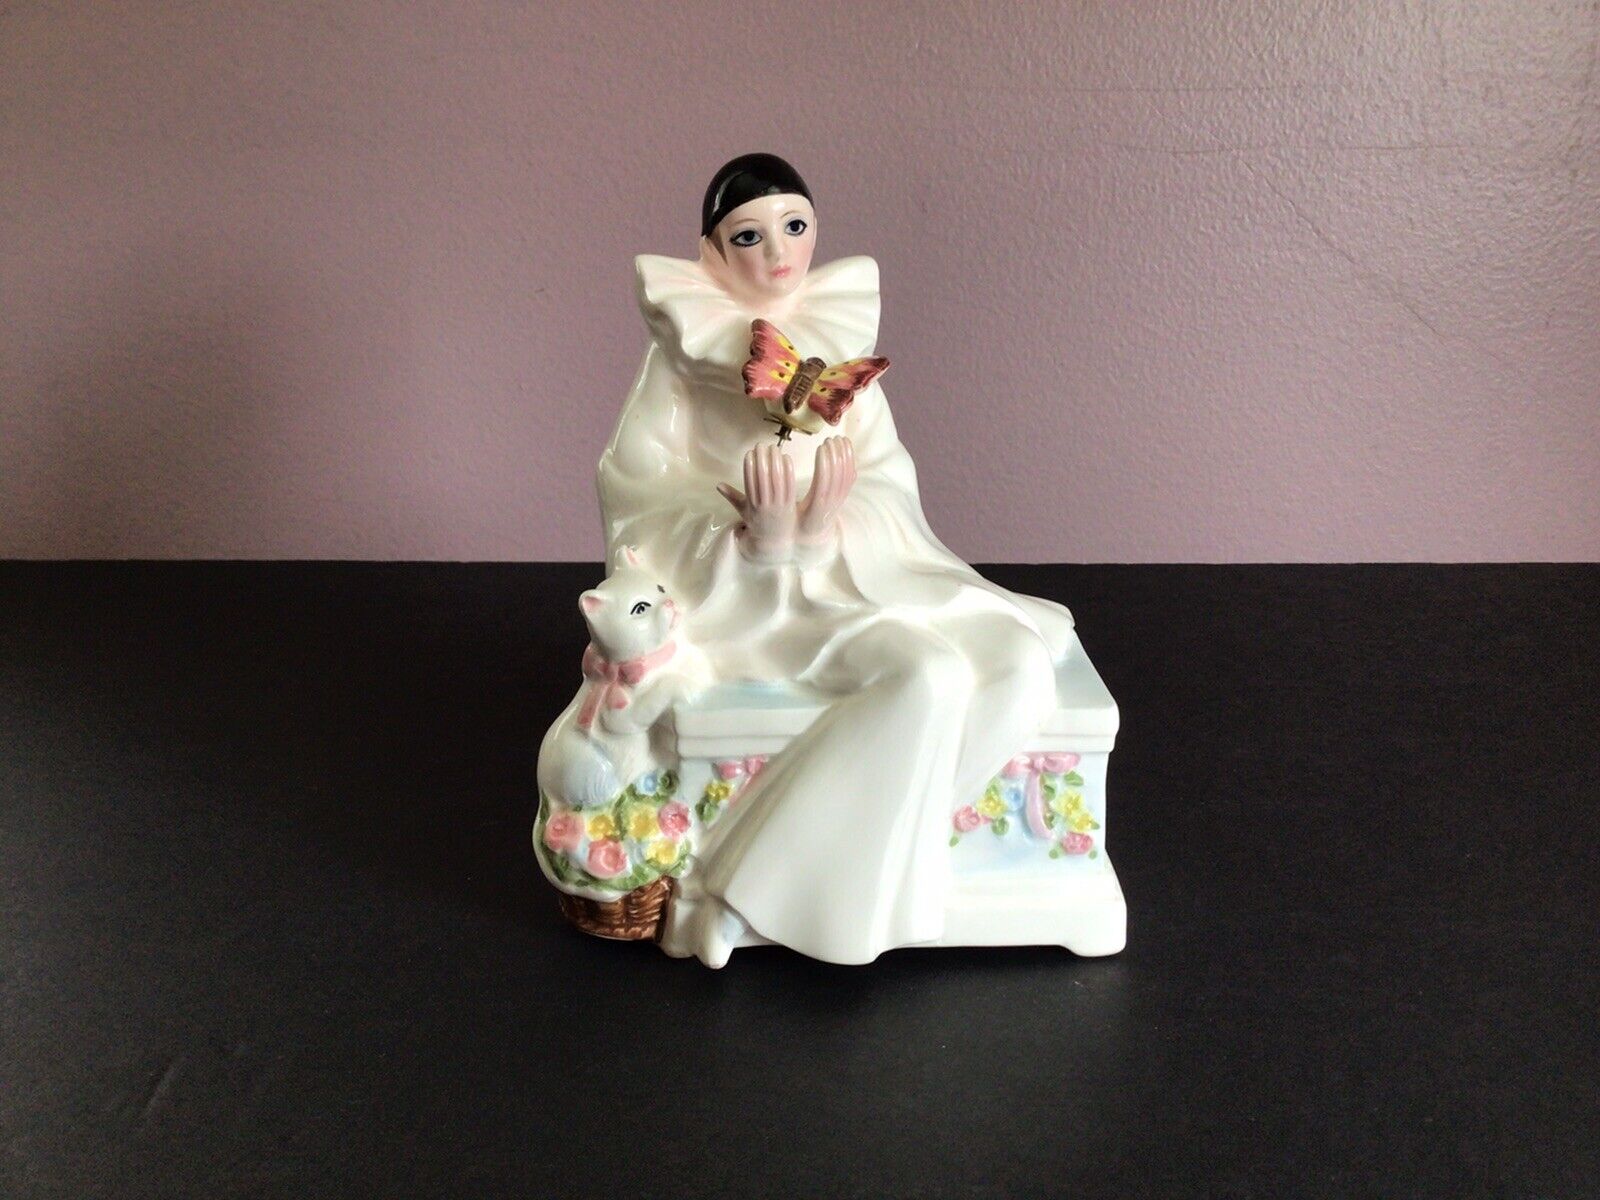 VTG Schmid Pierrot Love Mime Musical Figurine “Younger Than Spring Times” 1981